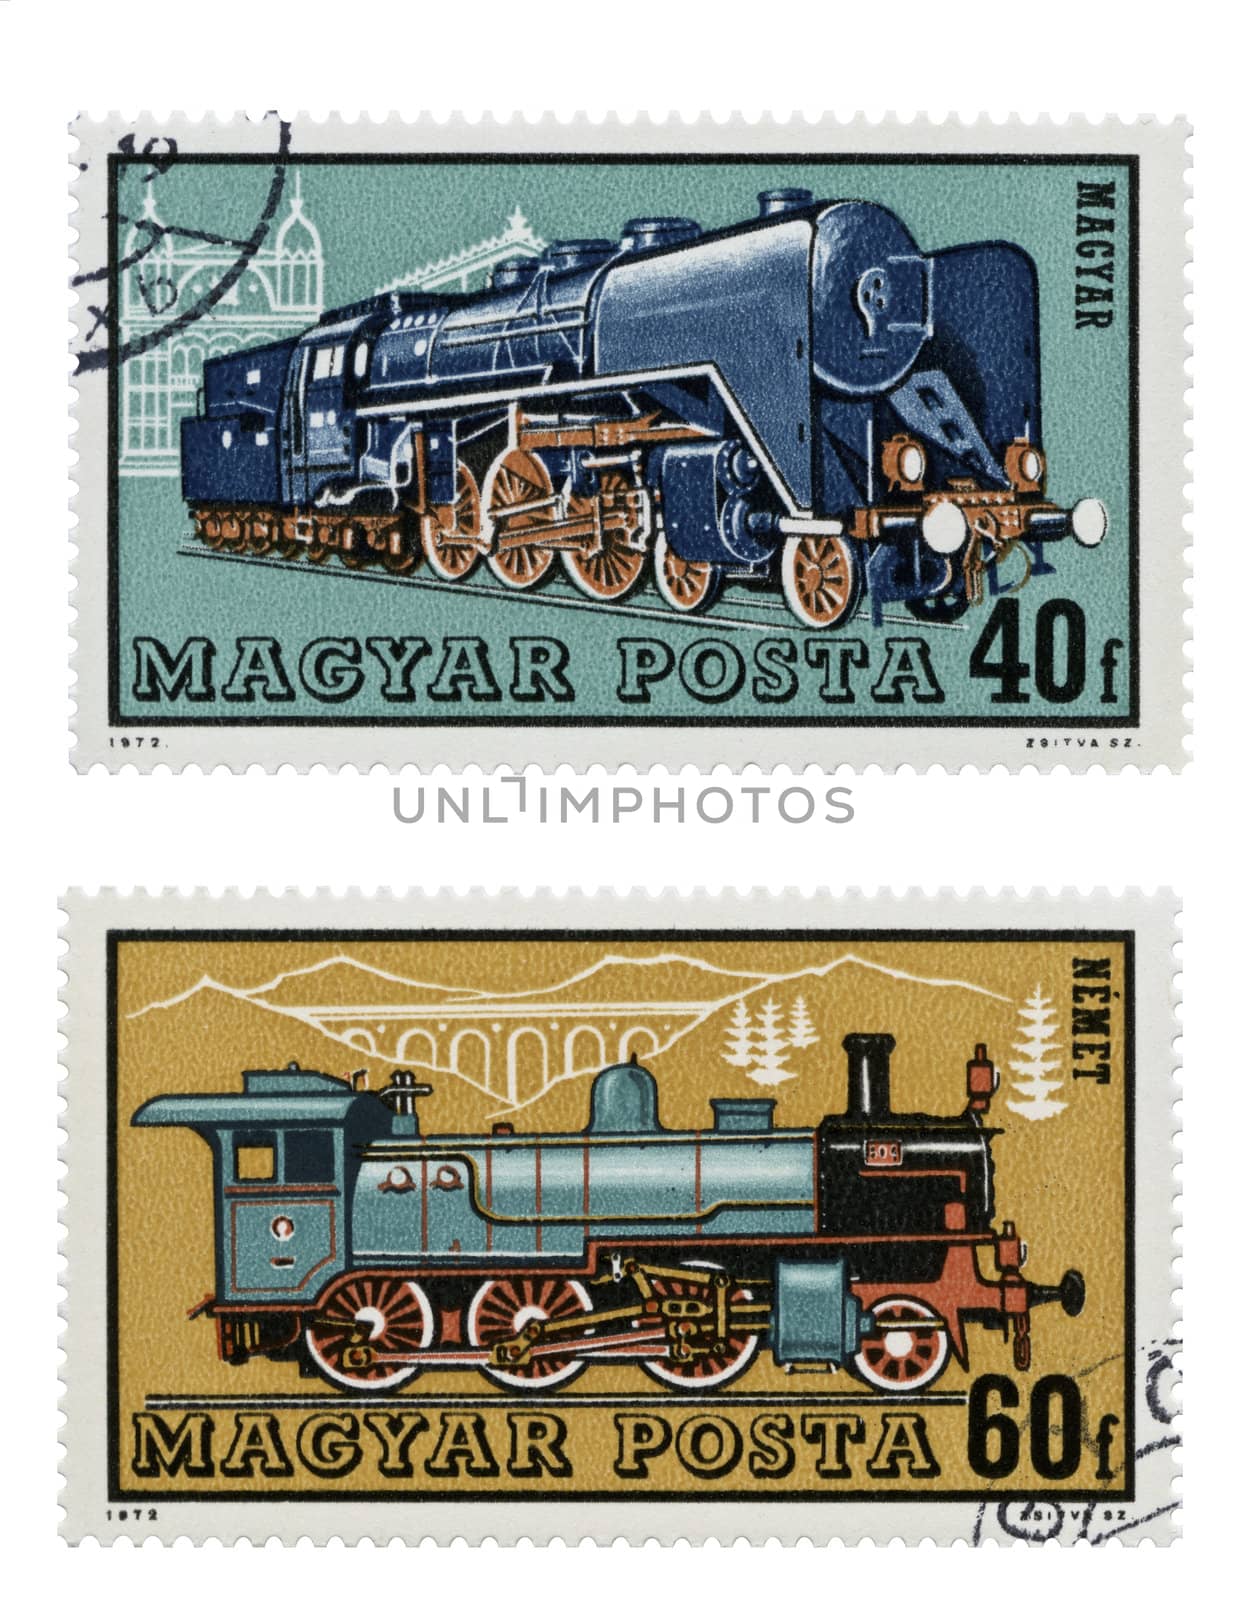 Train stamps for Magyar Posta in Budapest, Hungary